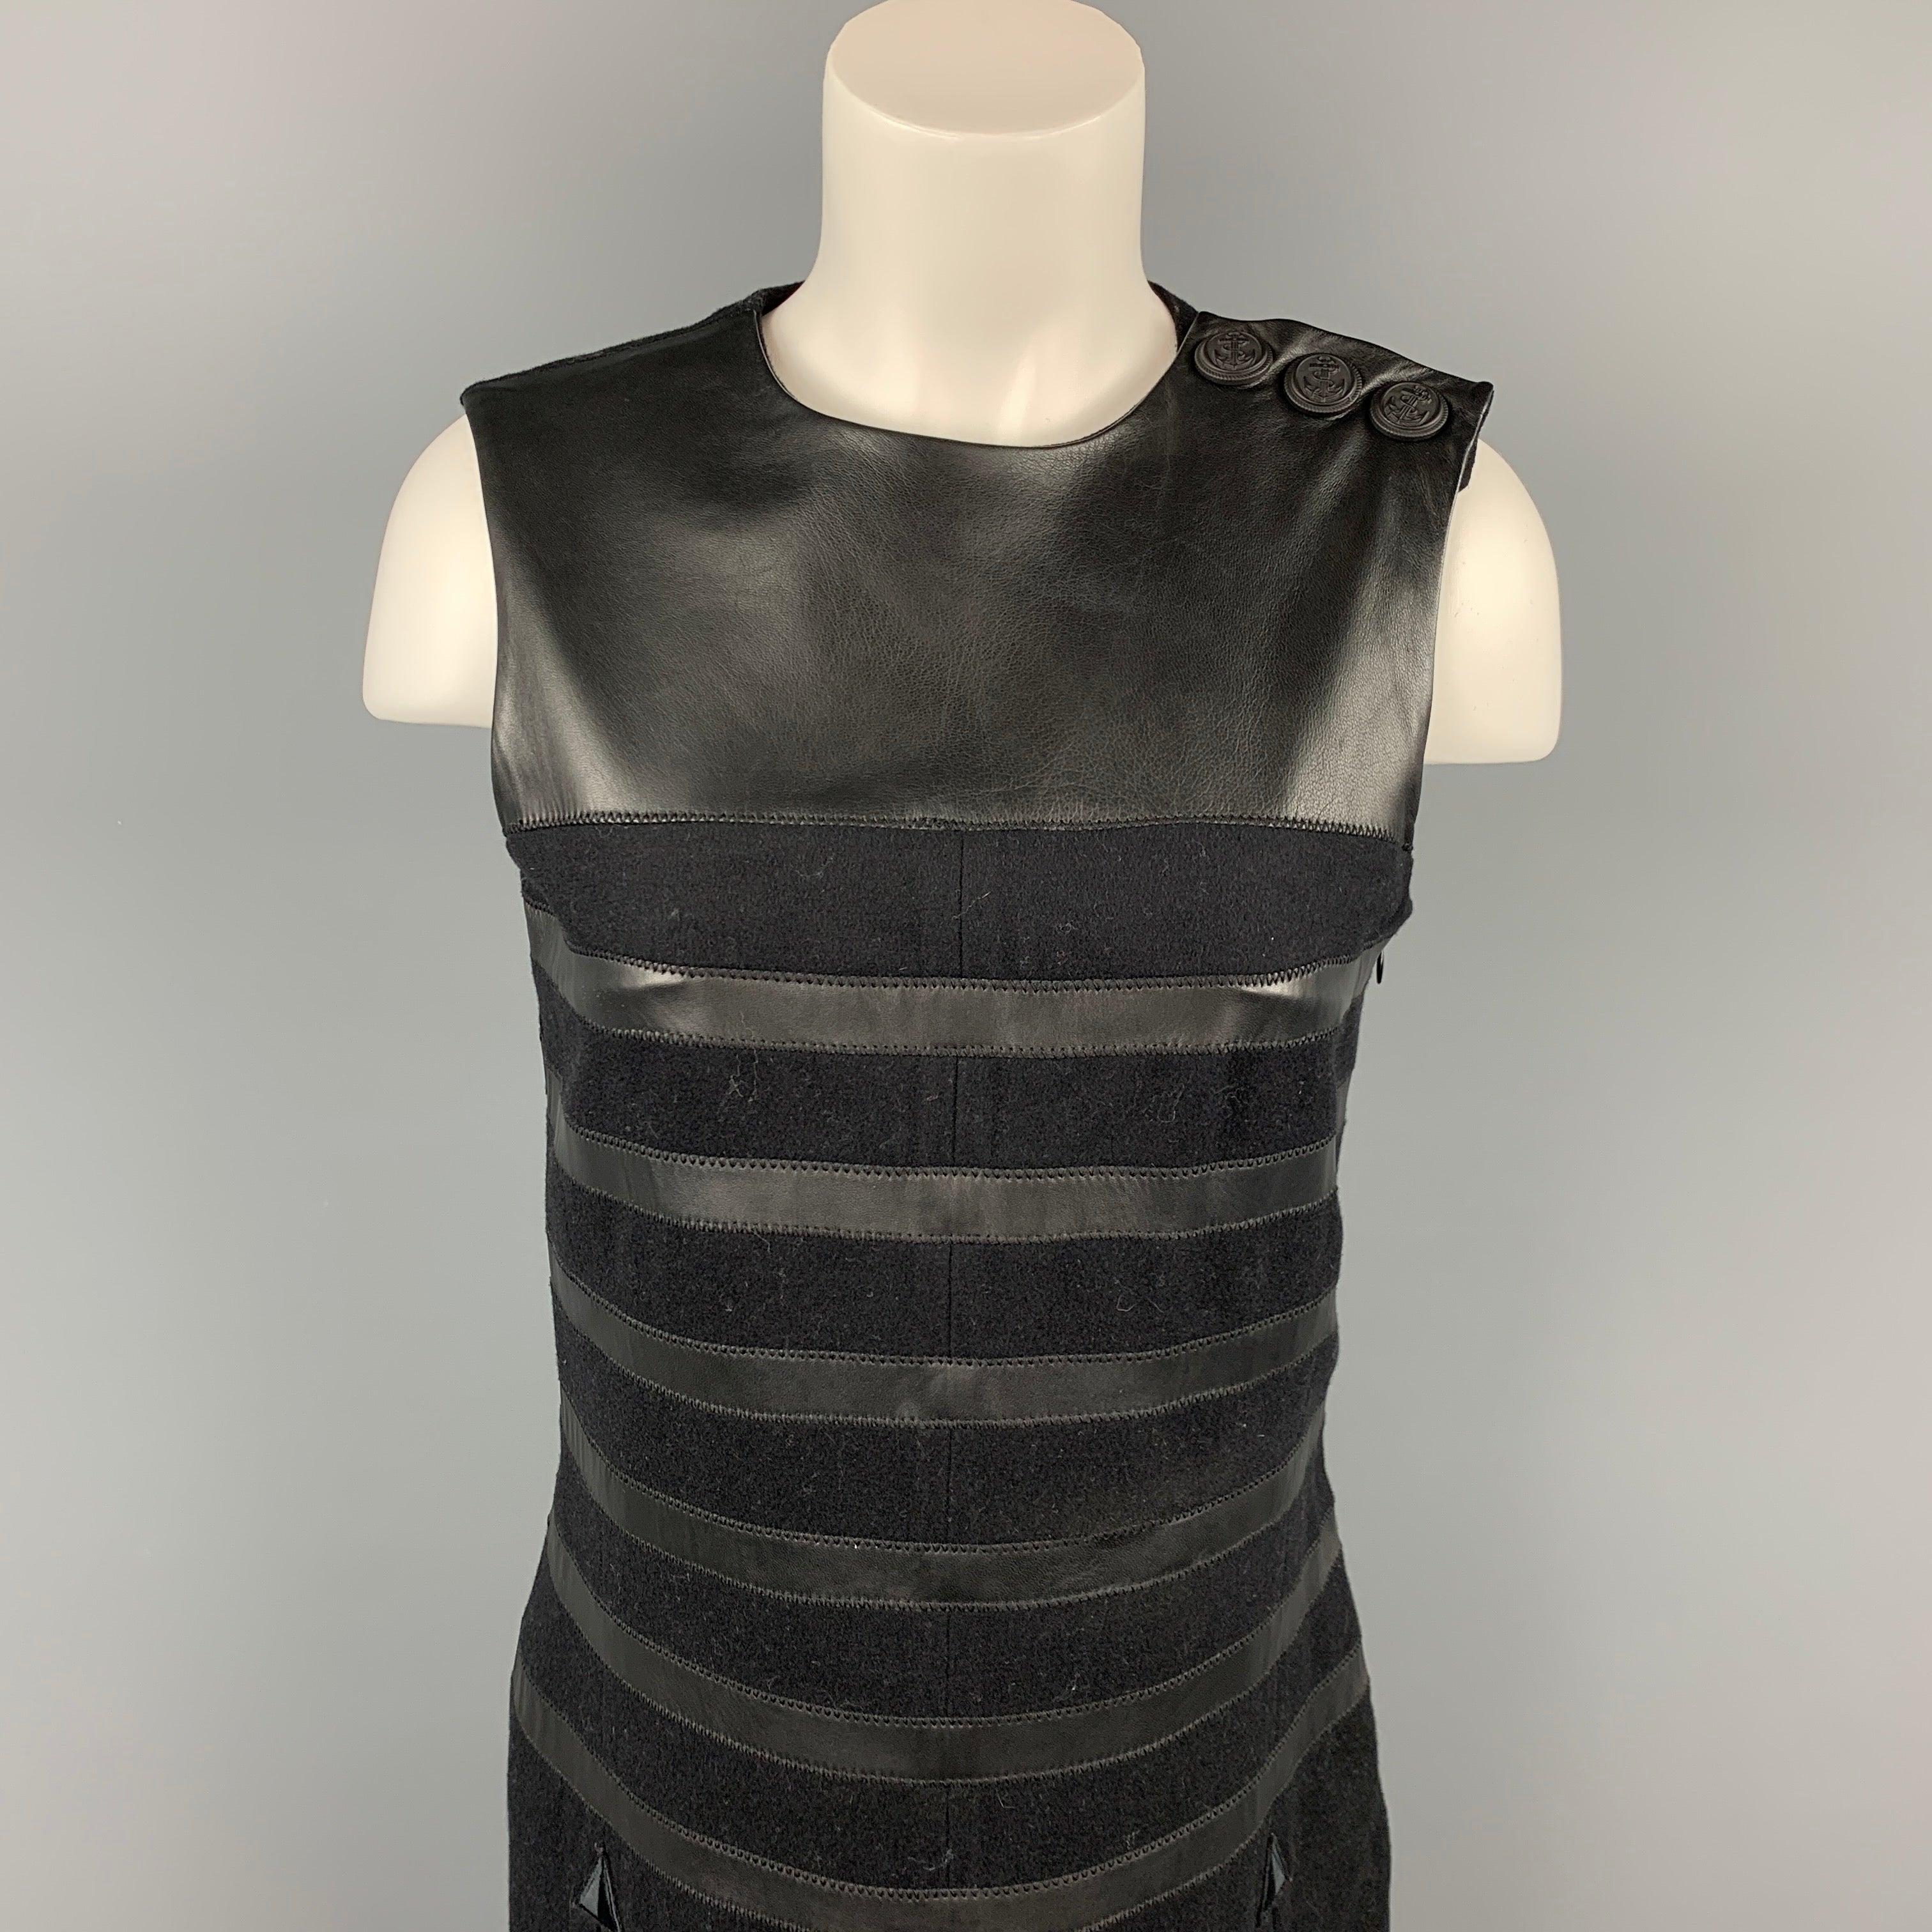 GAULTIER 2 by Jean Paul Gaultier dress comes in a black virgin wool featuring a shift style, leather trim, slit pockets, front & back slits, three detail, and a side zipper closure. Made in Italy.Very Good Pre-Owned Condition. 
 

 Marked:  I 42 / D